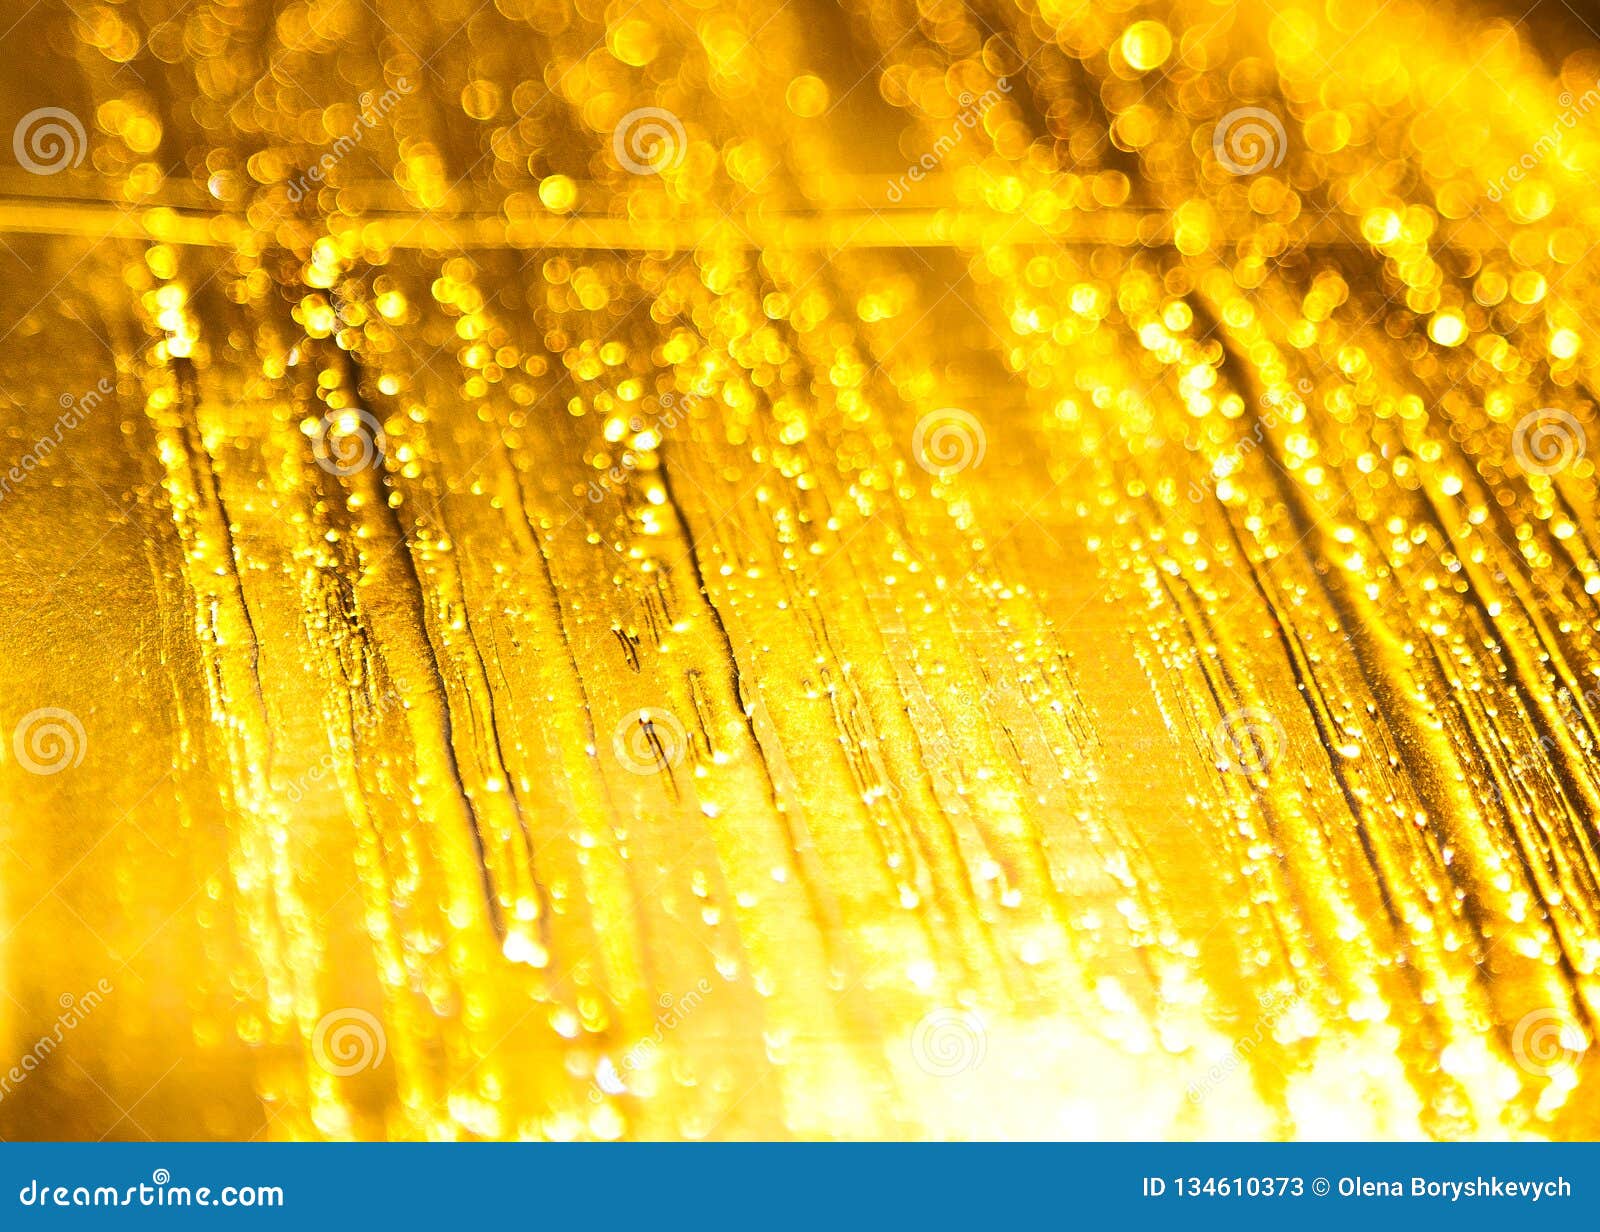 823 Background Gold Shine For FREE - MyWeb